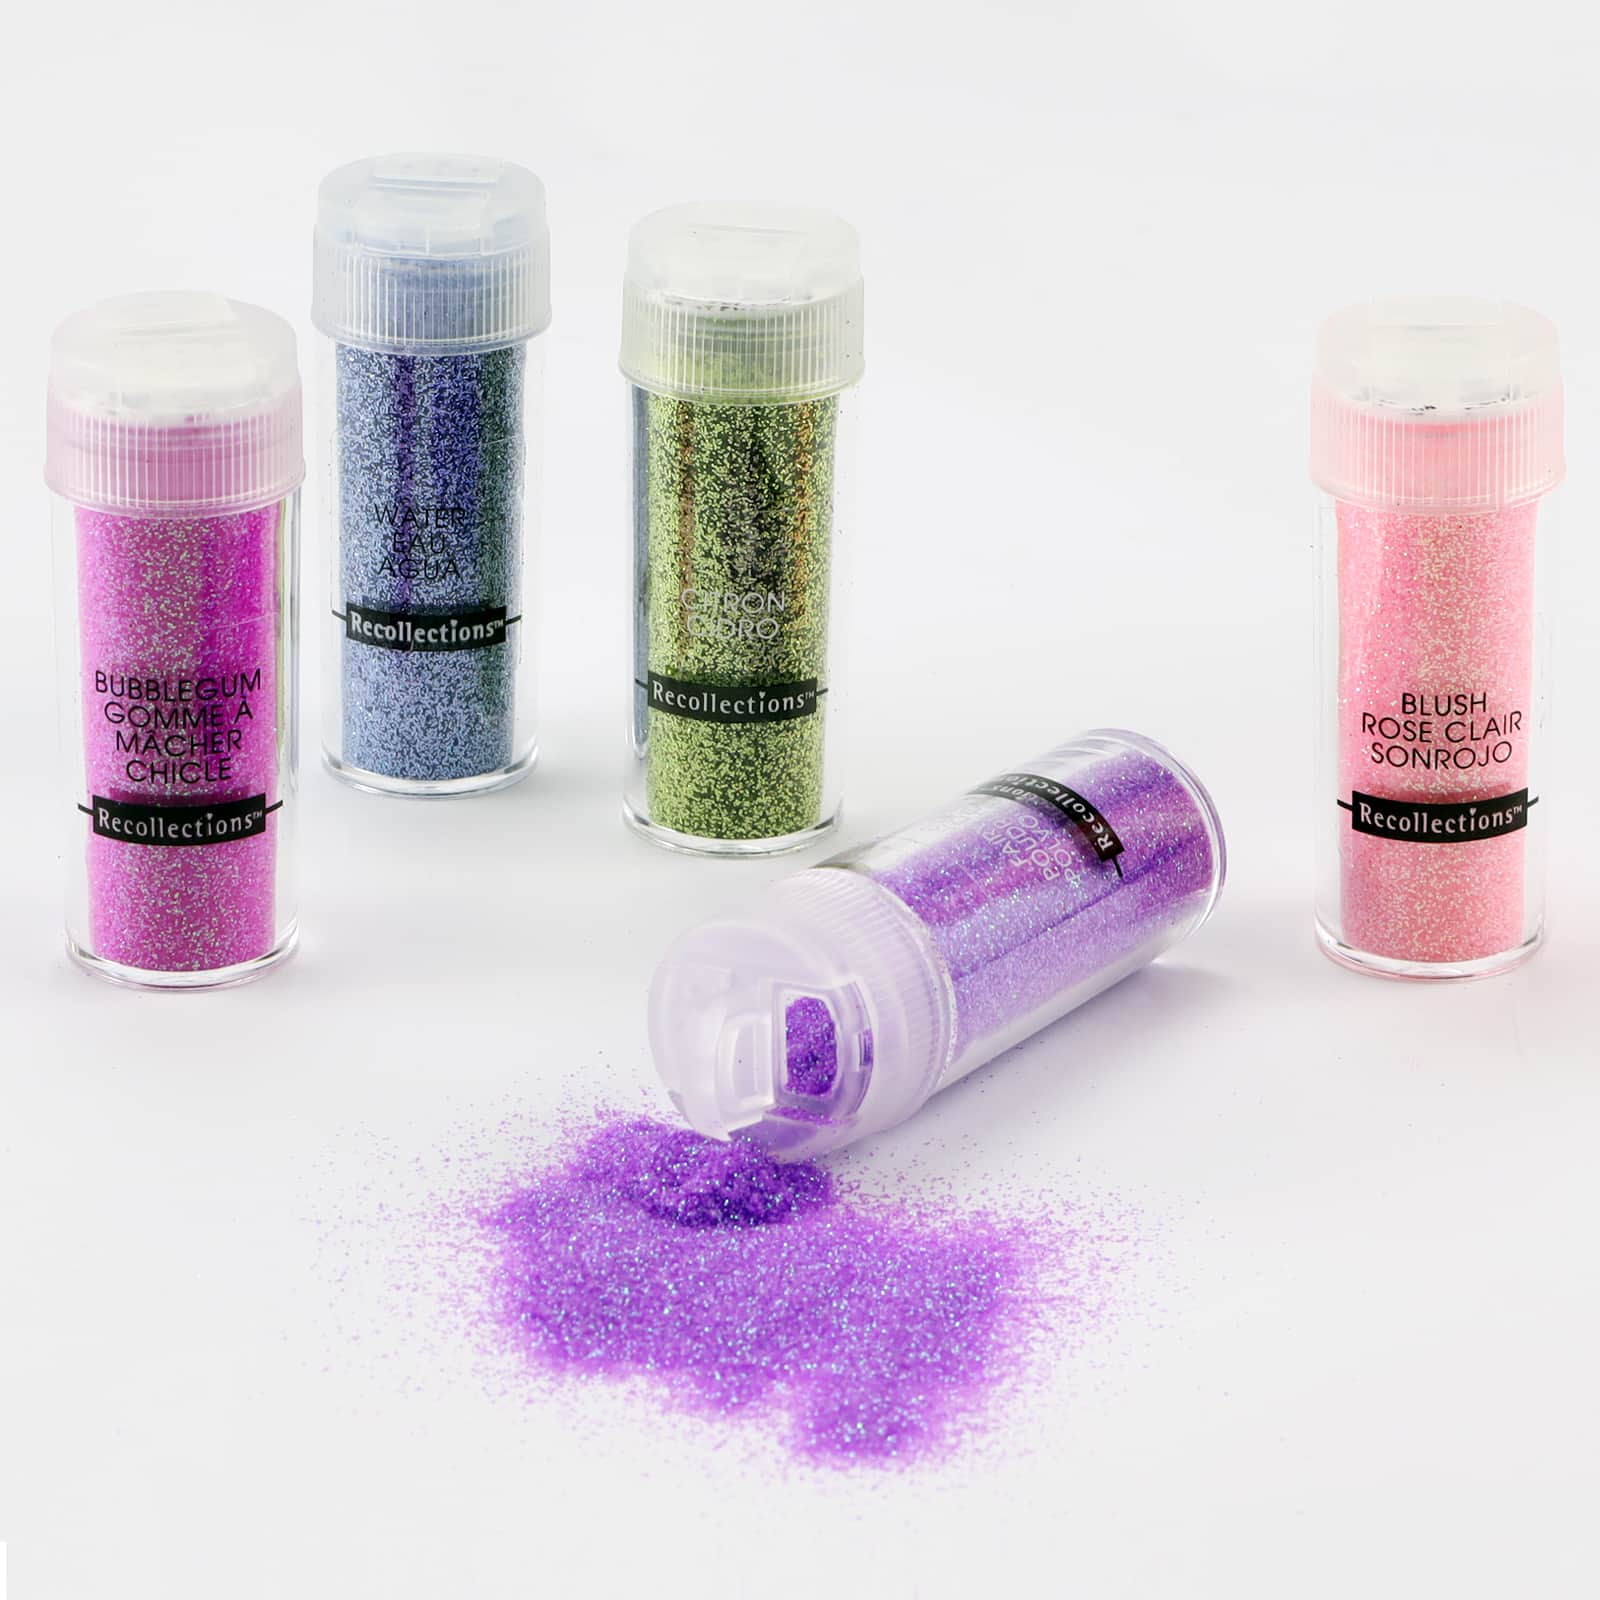 Recollections Mixed Glitter Set - 0.34 oz